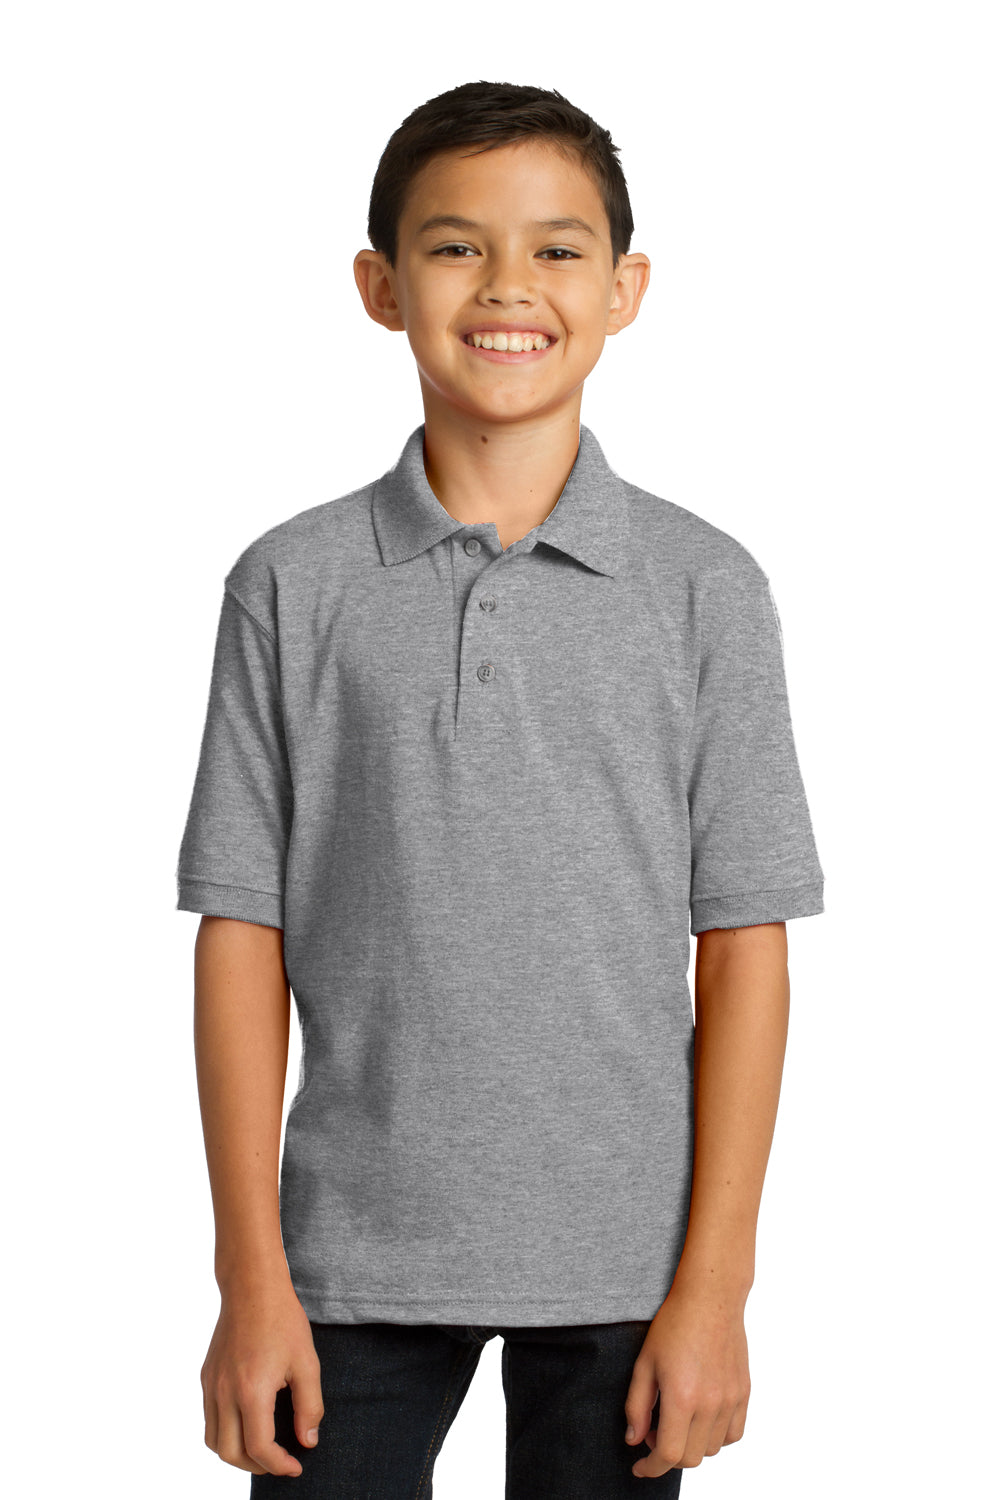 Port & Company KP55Y Youth Core Stain Resistant Short Sleeve Polo Shirt Heather Grey Front